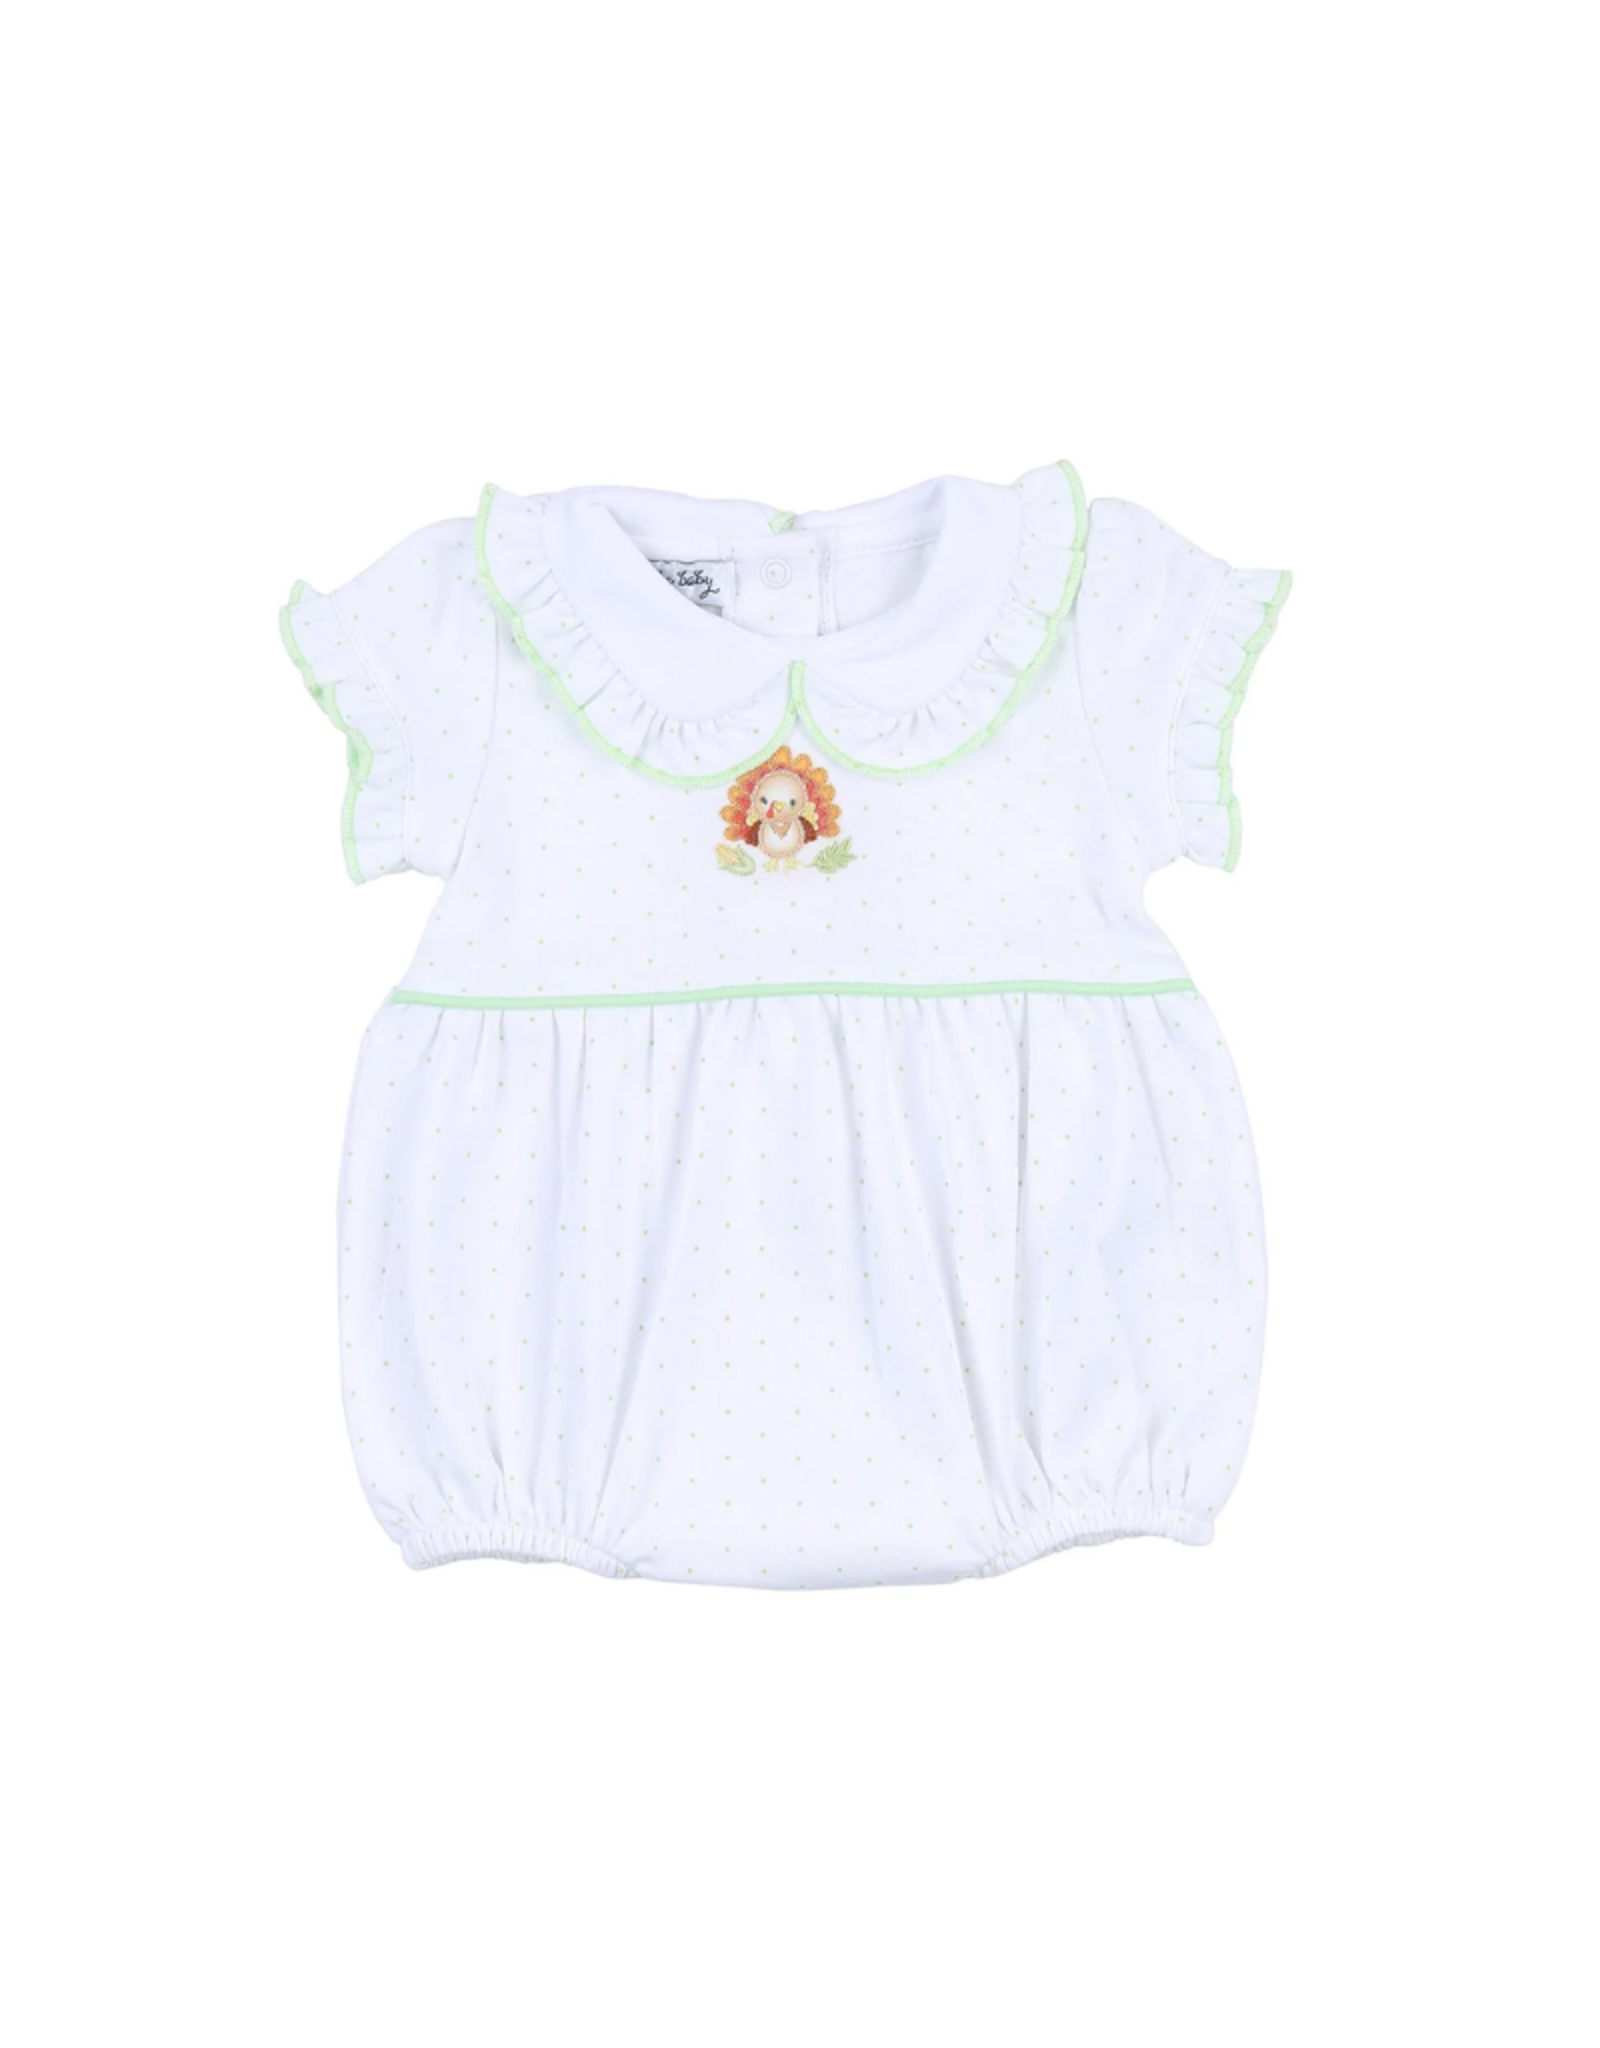 Magnolia Baby Giving Thanks Emb Collared Ruffle S/S Bubble